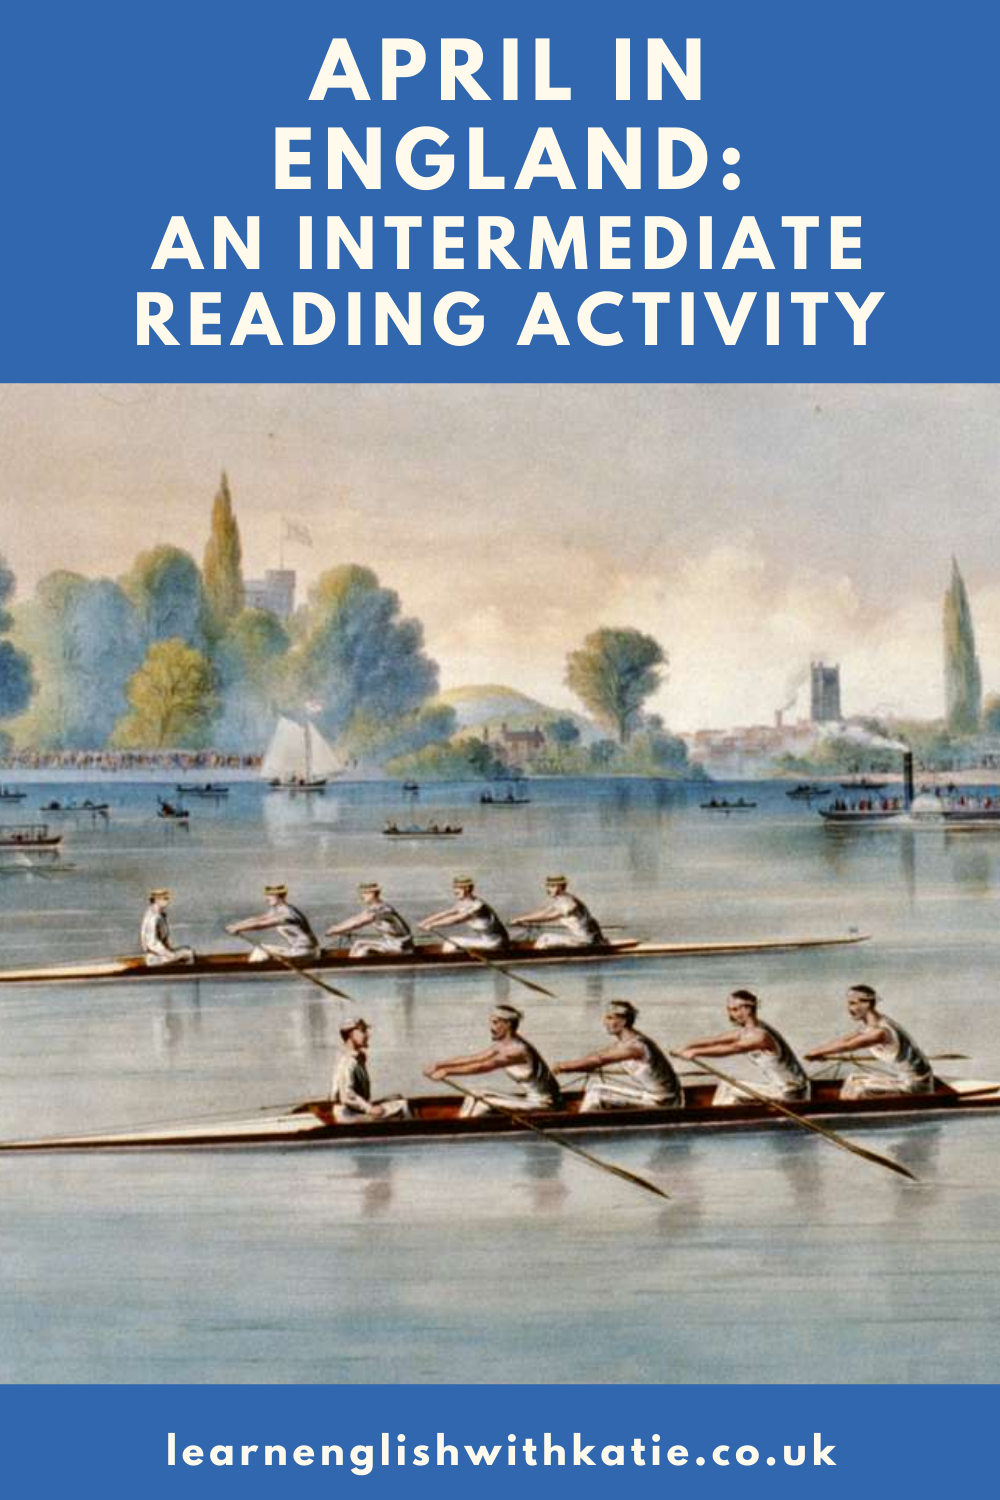 Pinterest image showing a painting of the boat race